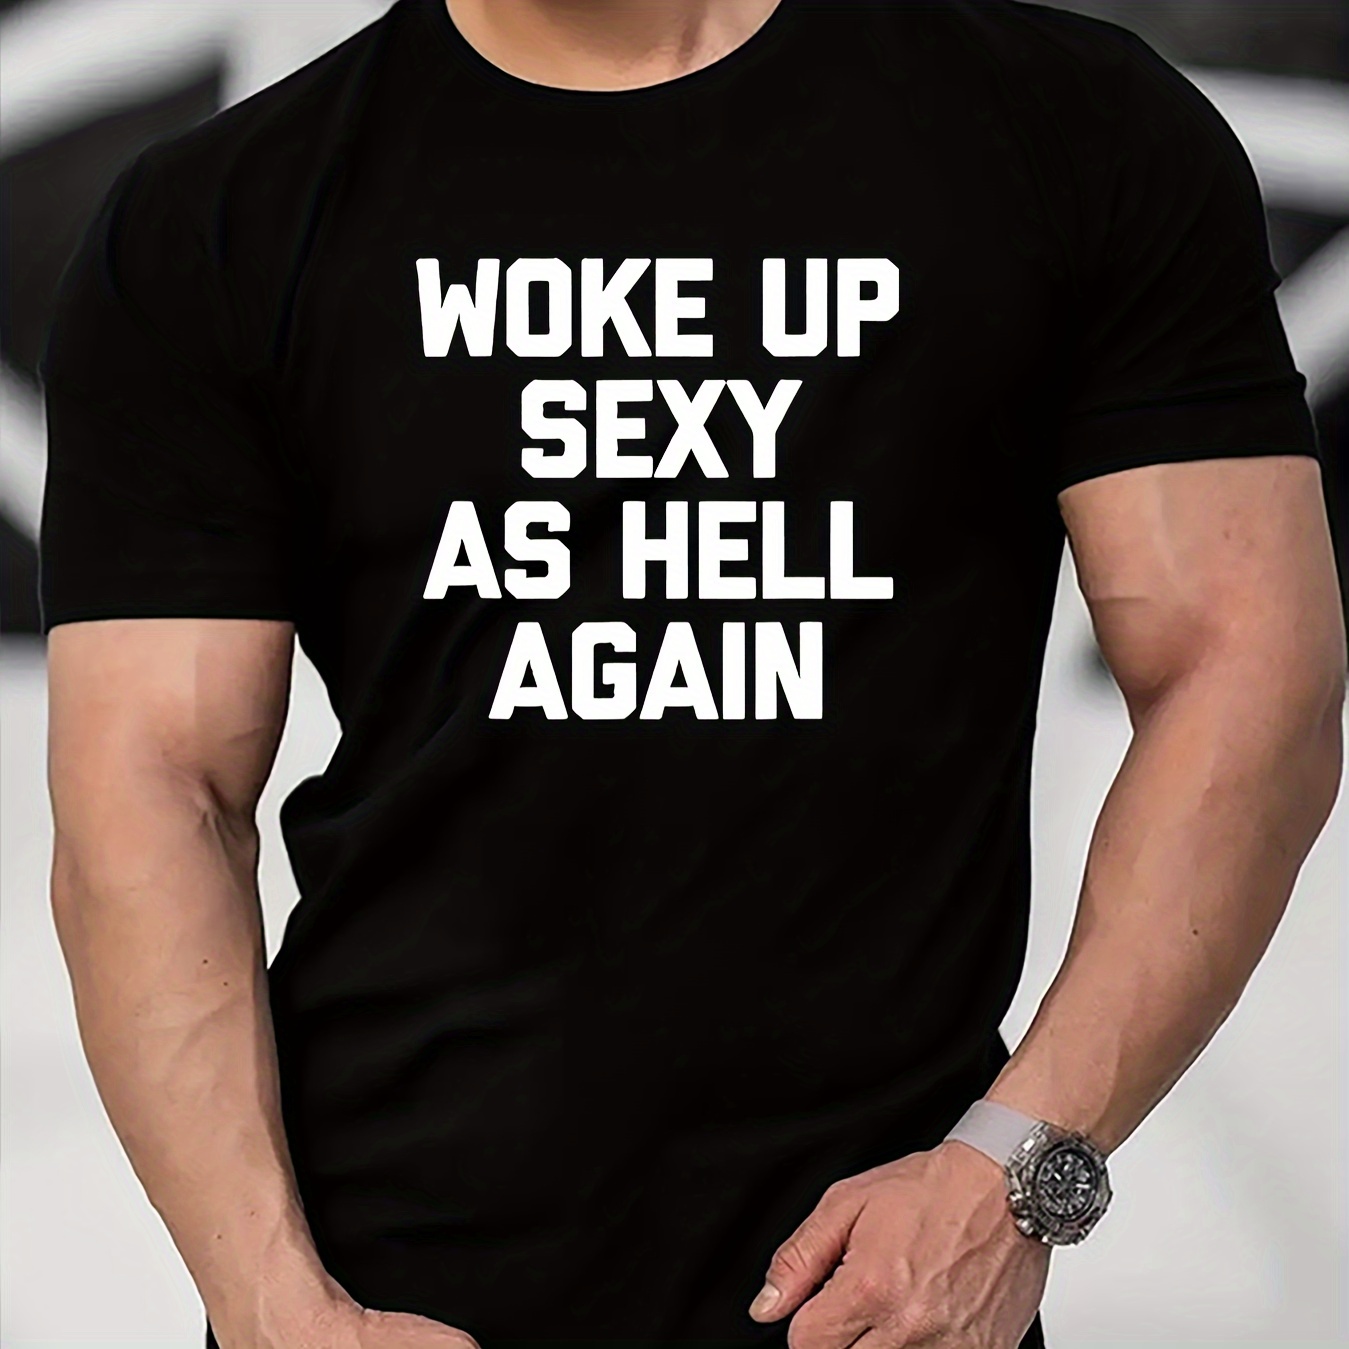 

woke Up-sexy-as -again" Letters Print Casual Crew Neck Short Sleeves For Men, Quick-drying Comfy Casual Summer T-shirt For Daily Wear Work Out And Vacation Resorts